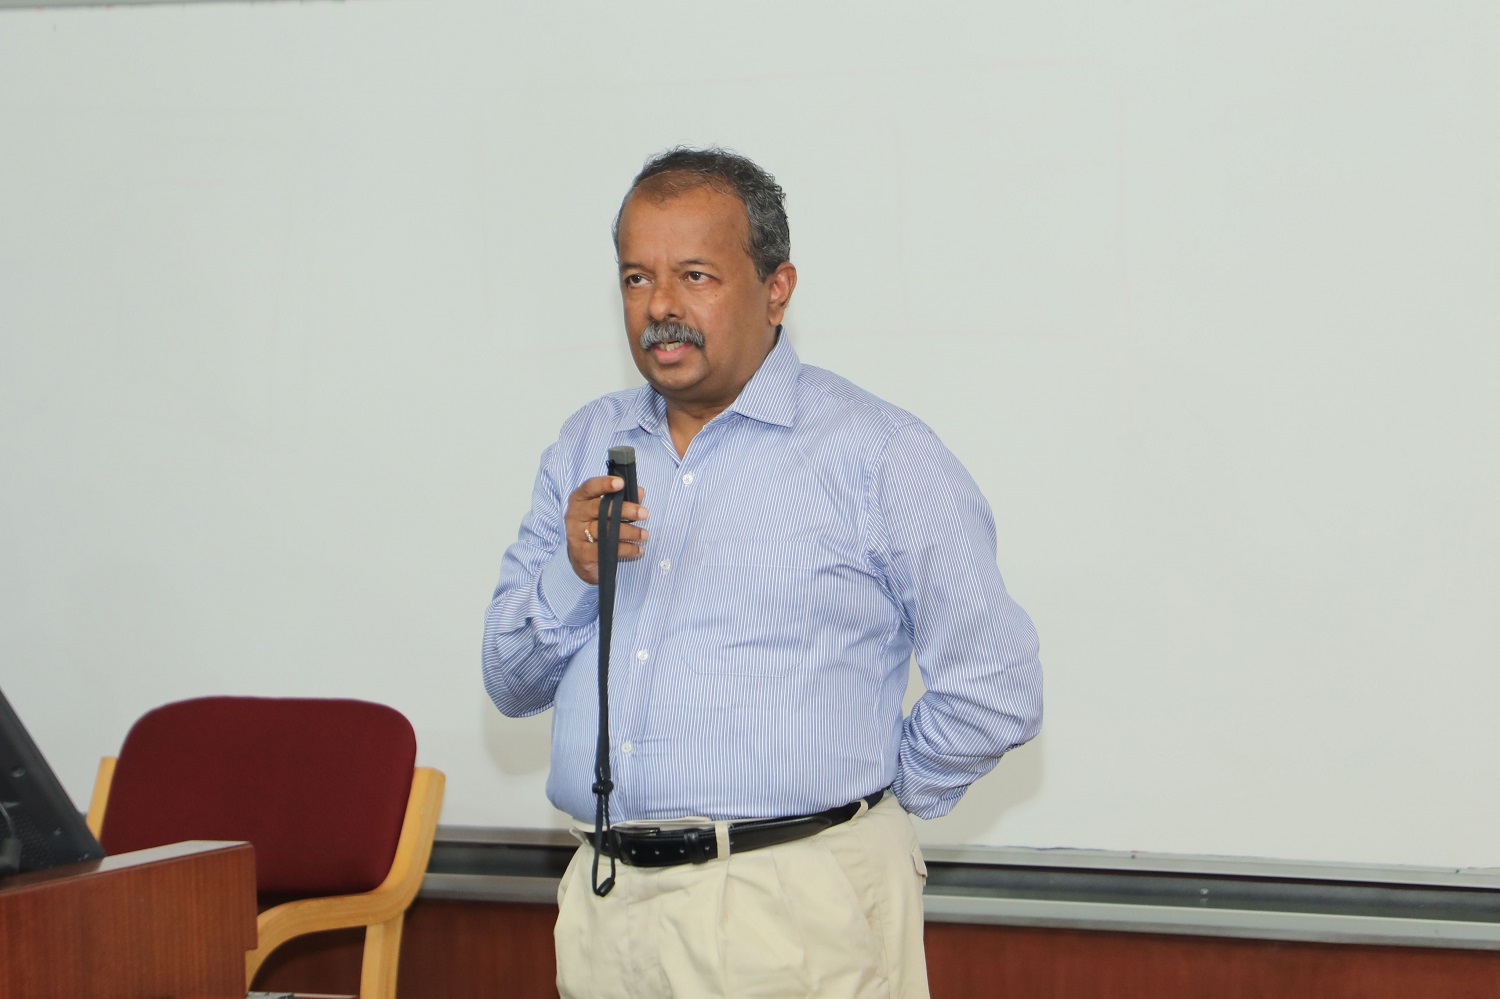 Prof. Gopal Naik, Chairperson, Centre for Public Policy, delivers the vote of thanks.